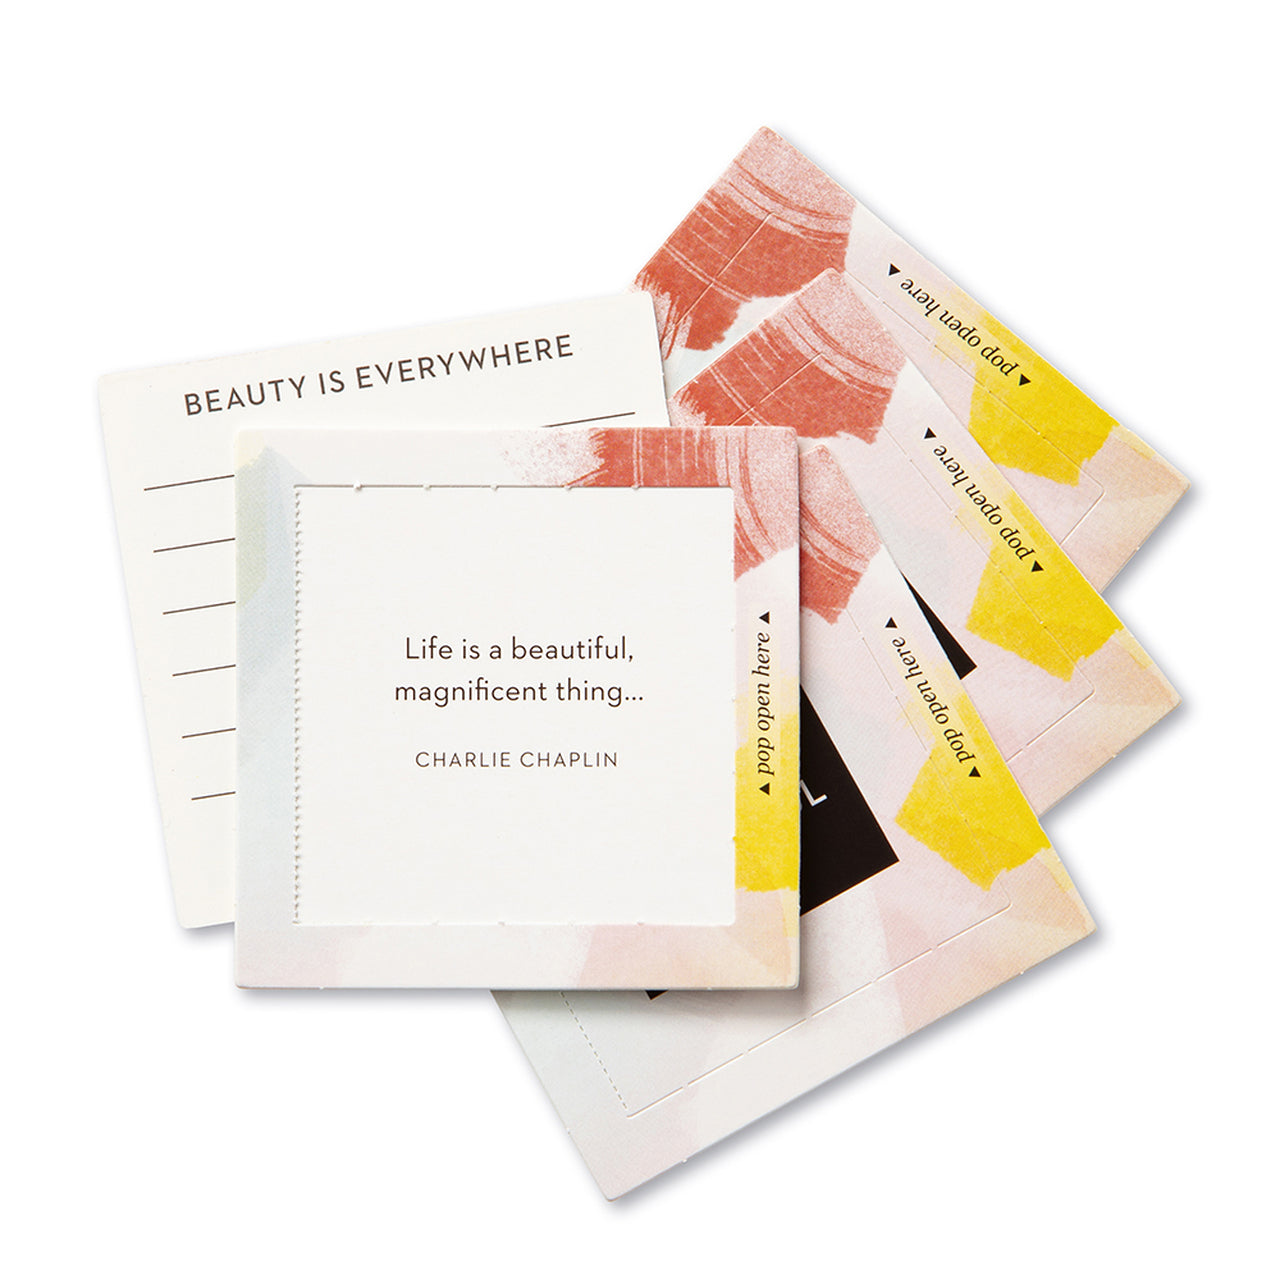 Life Is Beautiful Pop-Open Cards